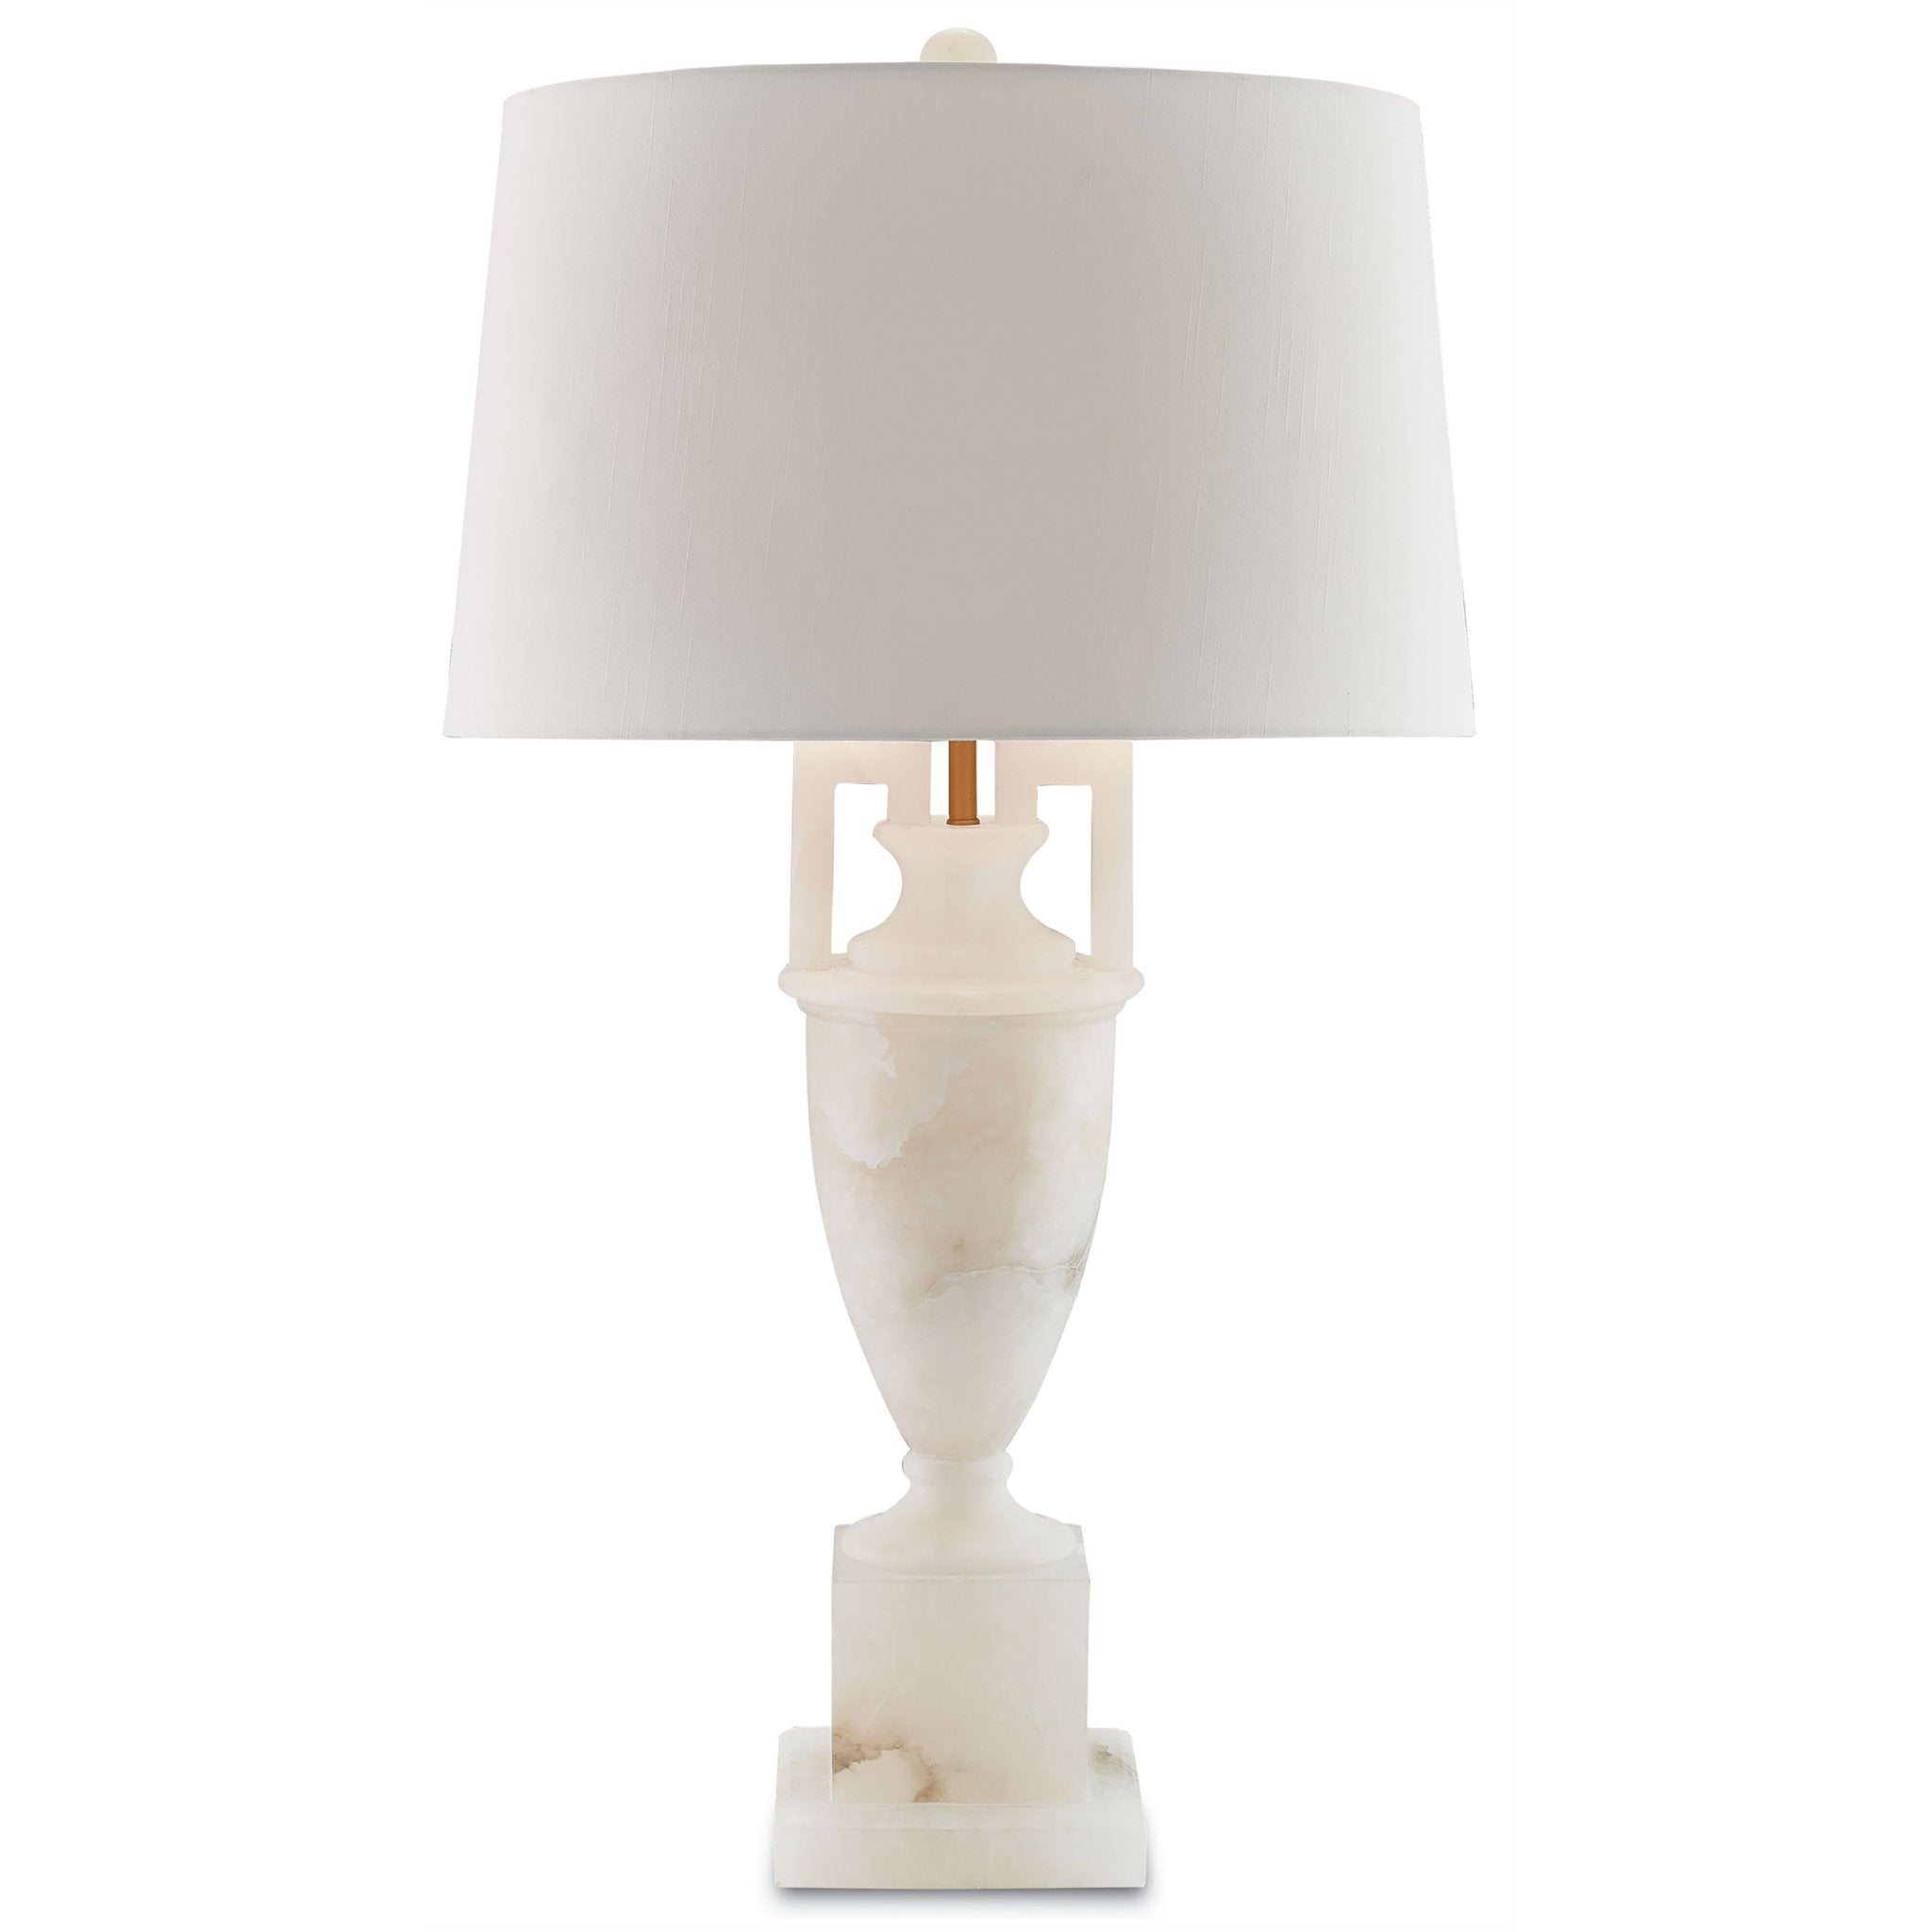 Clifford White Table Lamp - Natural/Coffee Bronze